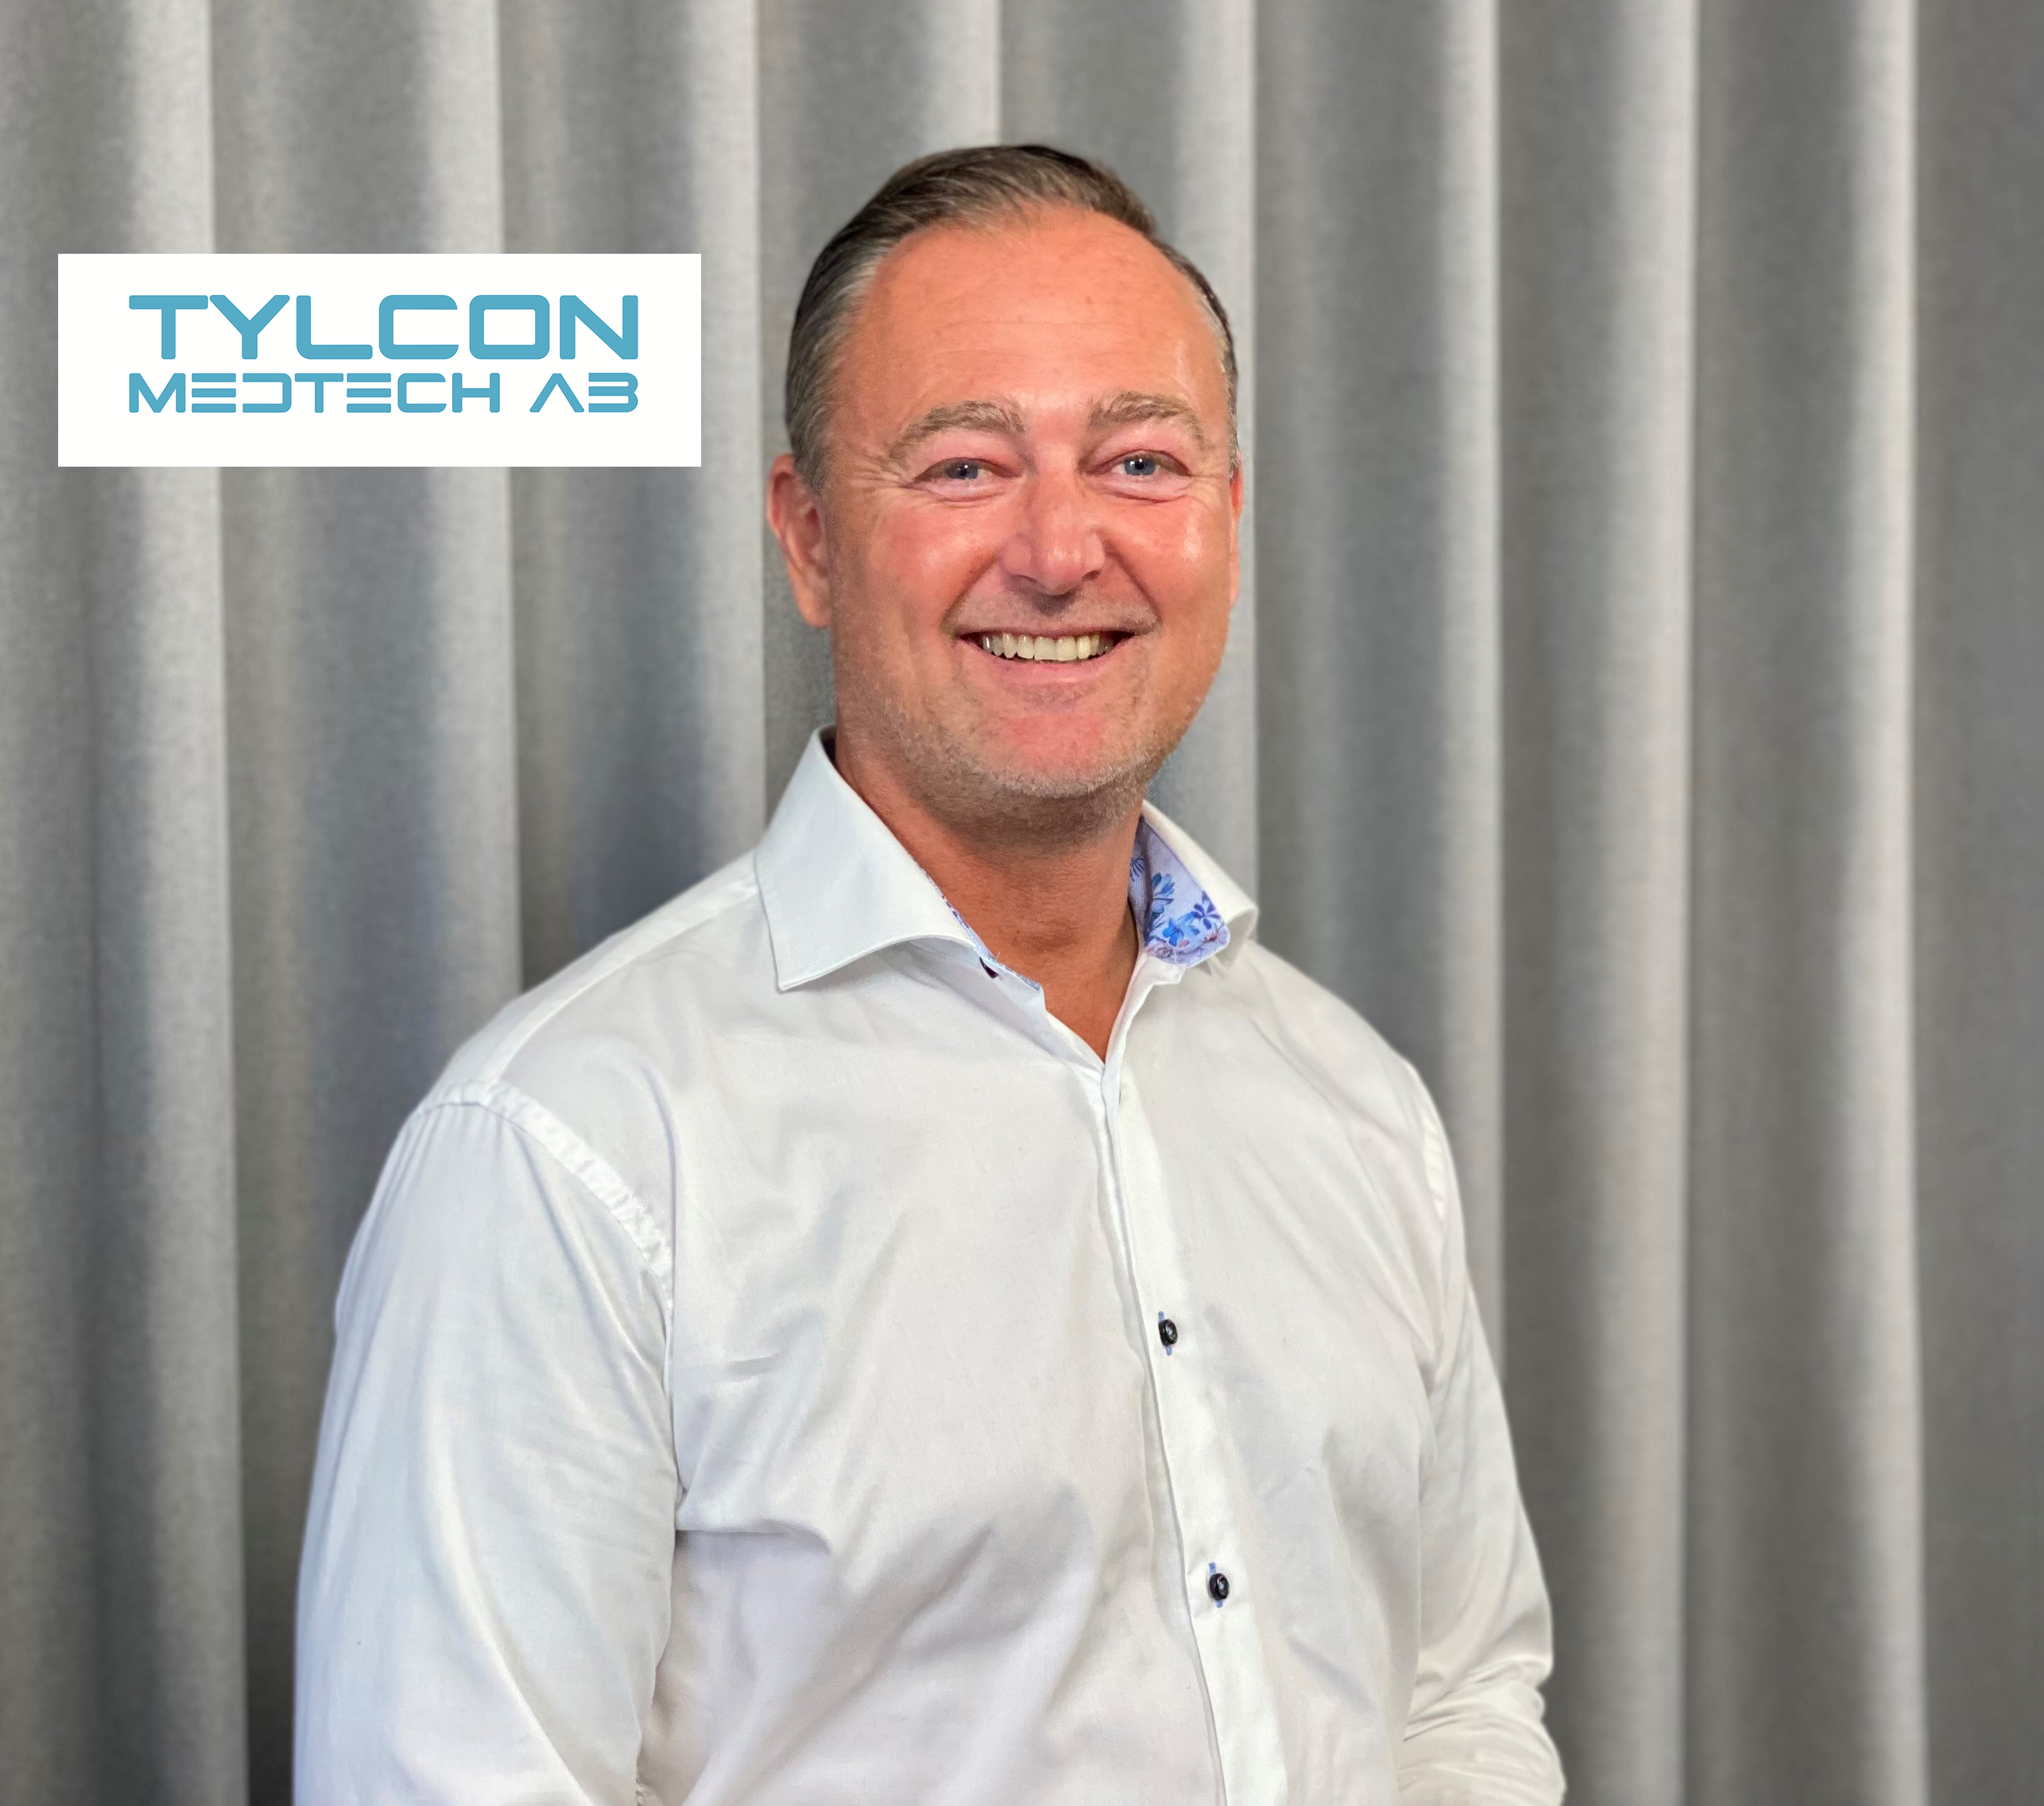 tylcon